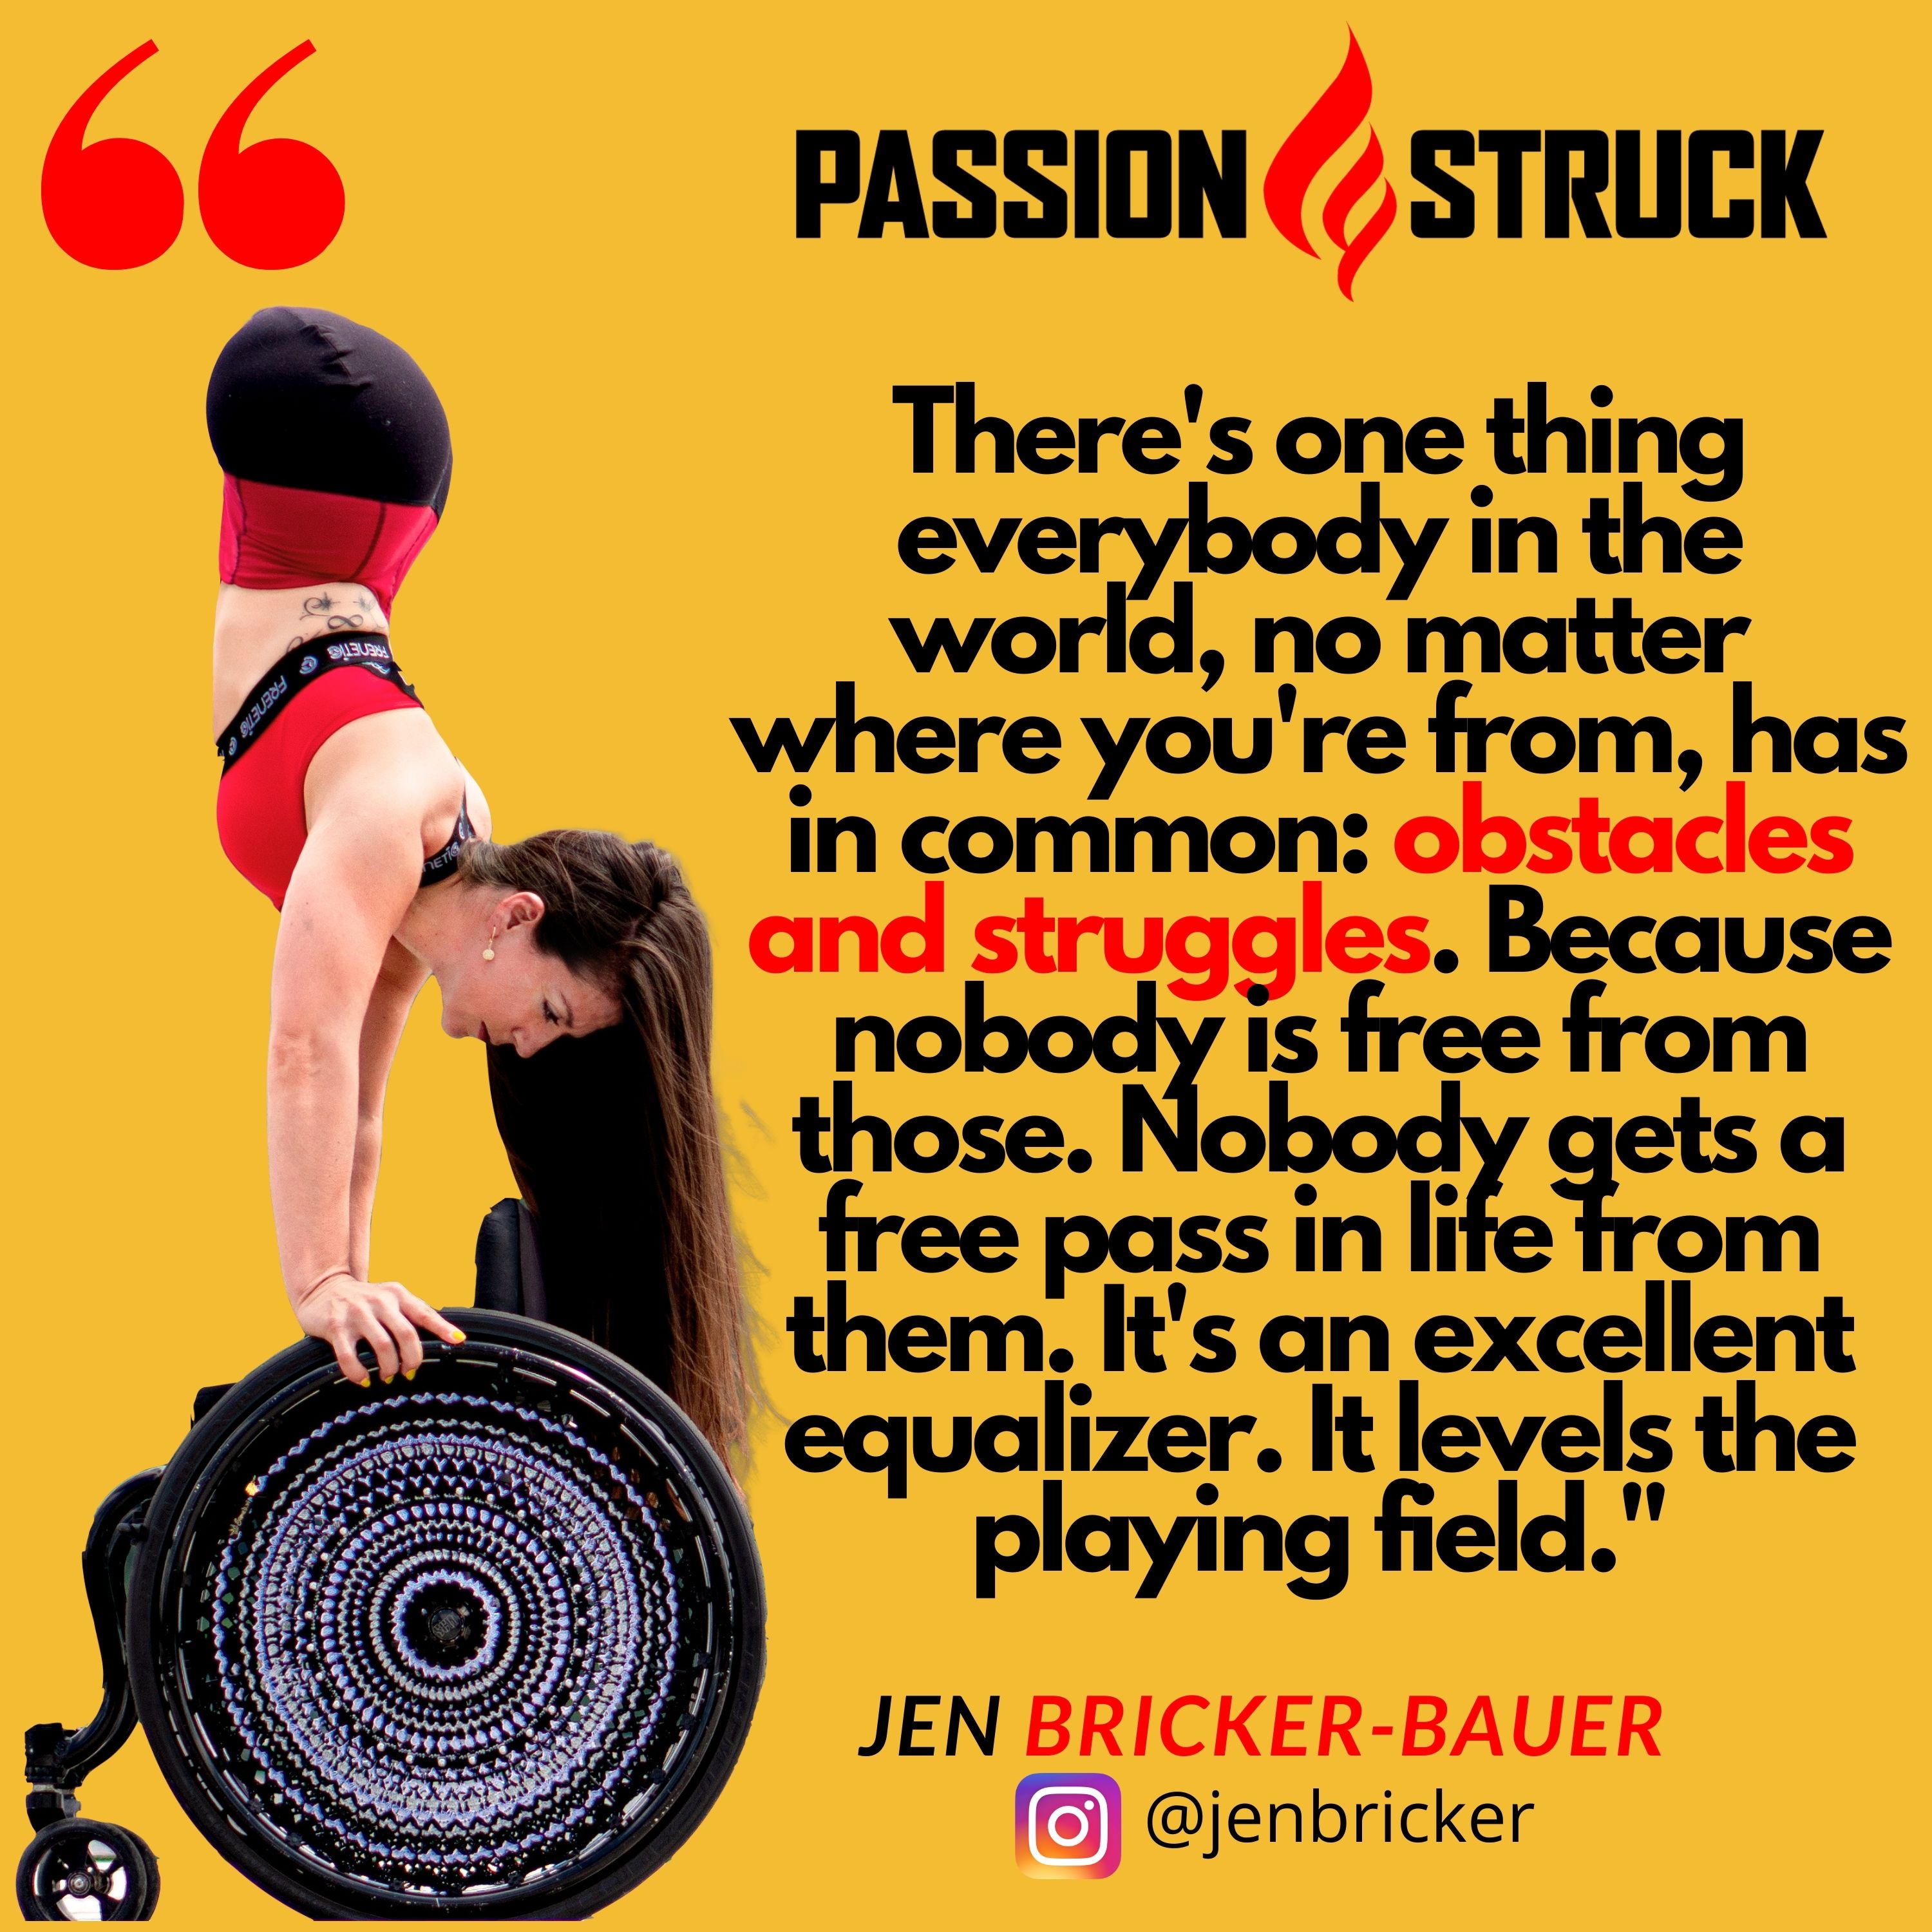 Quote by Jen Bricker-Bauer on overcoming obstacles and struggles